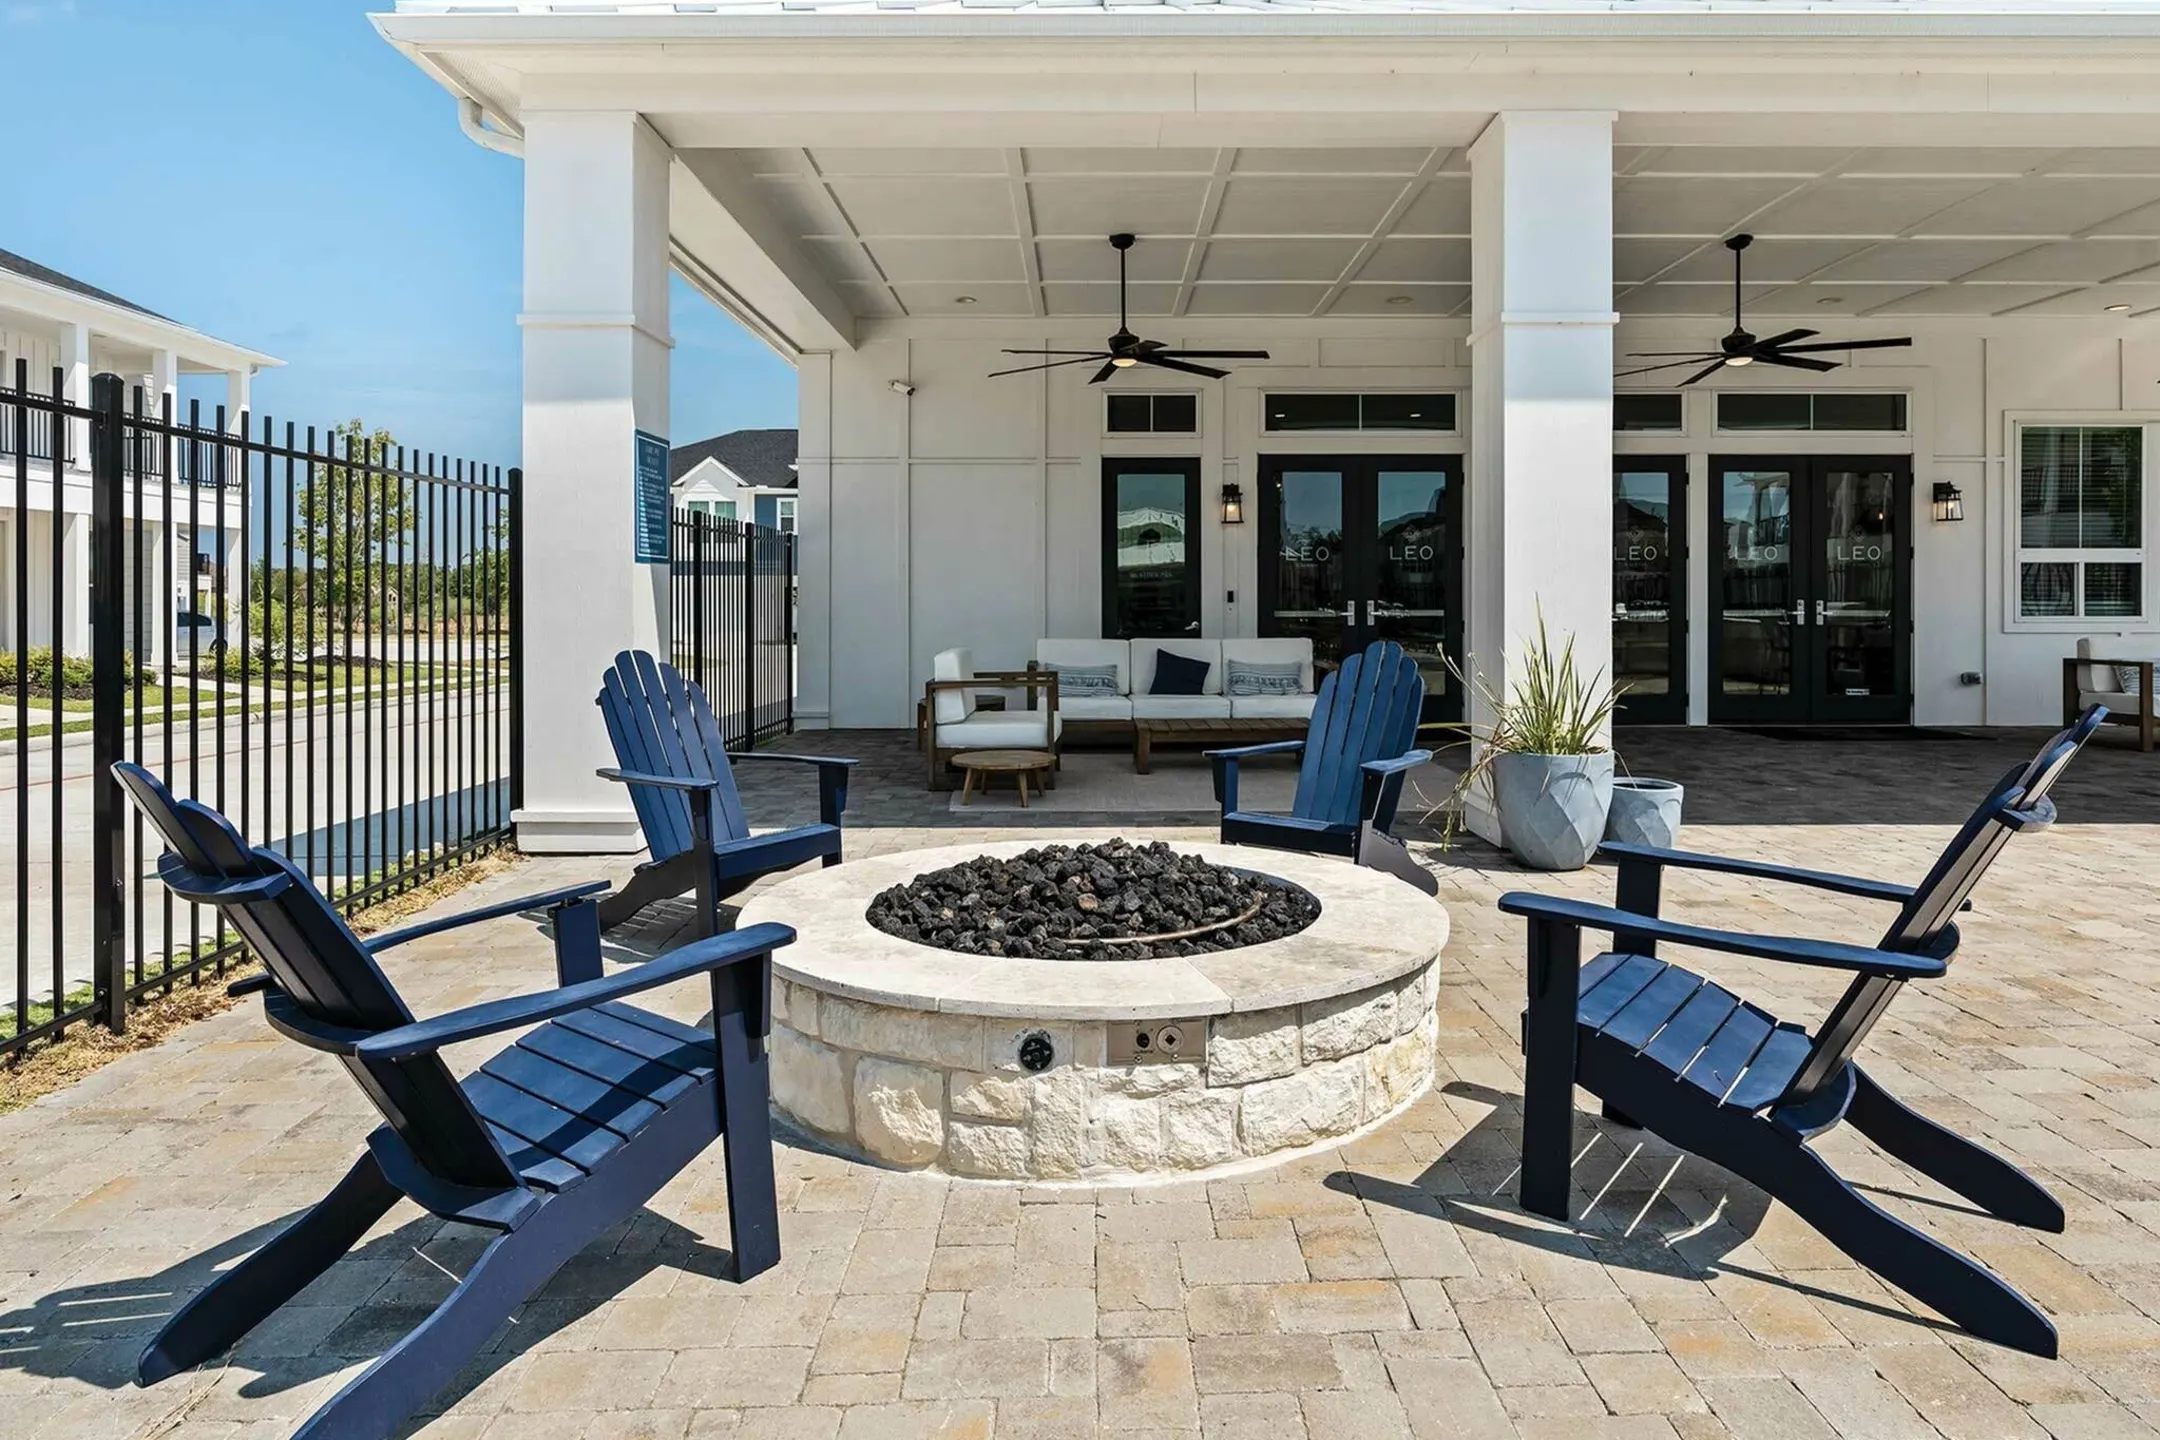 Patio / Deck - LEO at West Fork - Conroe, TX